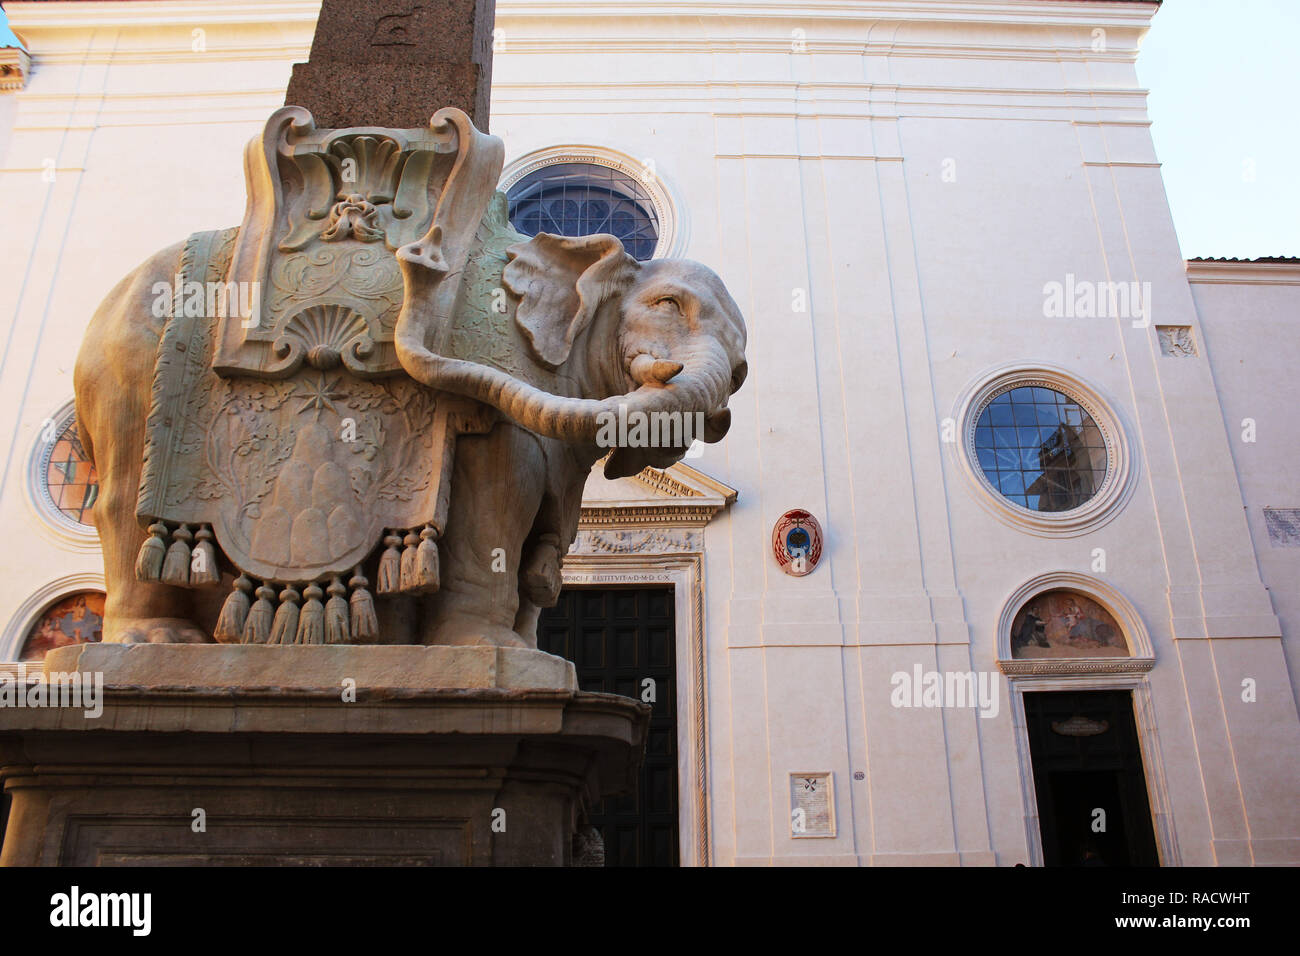 ROME, ITALY - December 28, 2018: The 'Elephant with Obelisk' statue is seen at Piazza della Minerva square on October 31, 2017 in Rome, Italy. Rome Rome is one of the most popular tourist destinations. Stock Photo